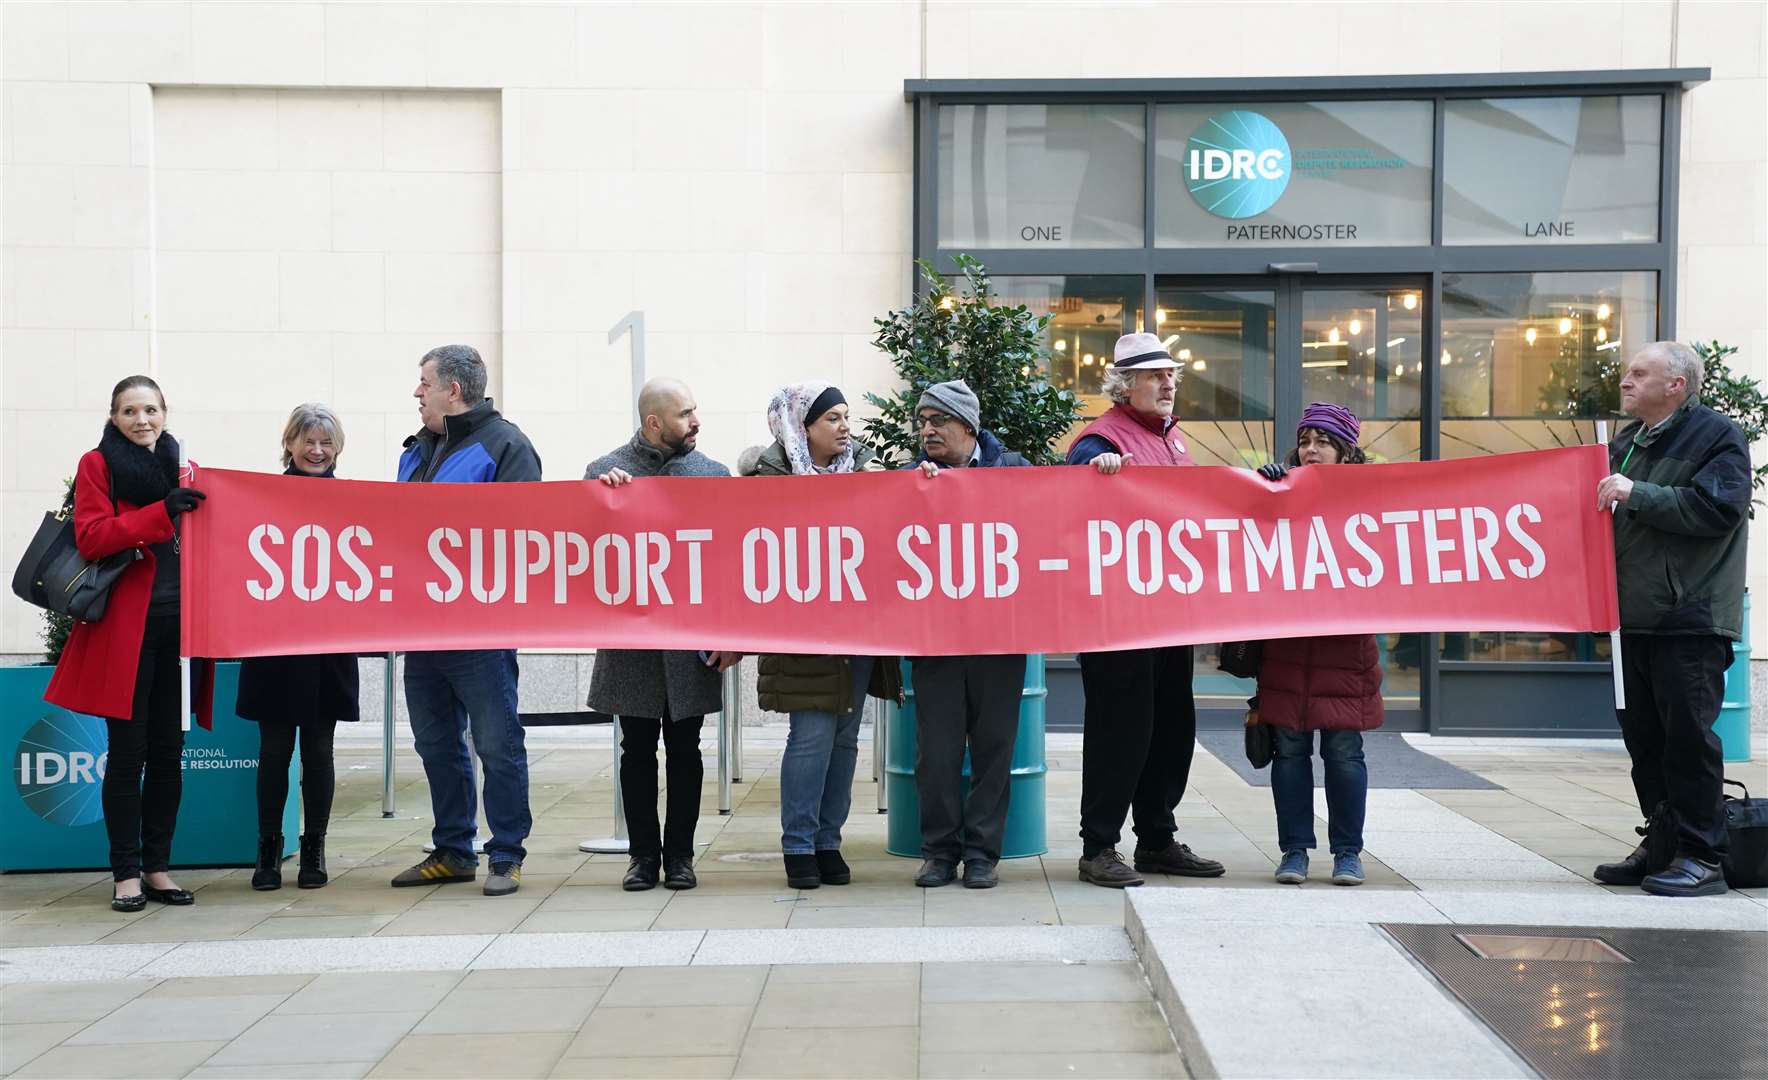 Protestors outside the Post Office Horizon IT inquiry. More than 700 branch managers were prosecuted by the Post Office after Fujitsu’s faulty accounting software, Horizon, made it look as though money was missing from their shops (Kirsty O’Connor/PA)